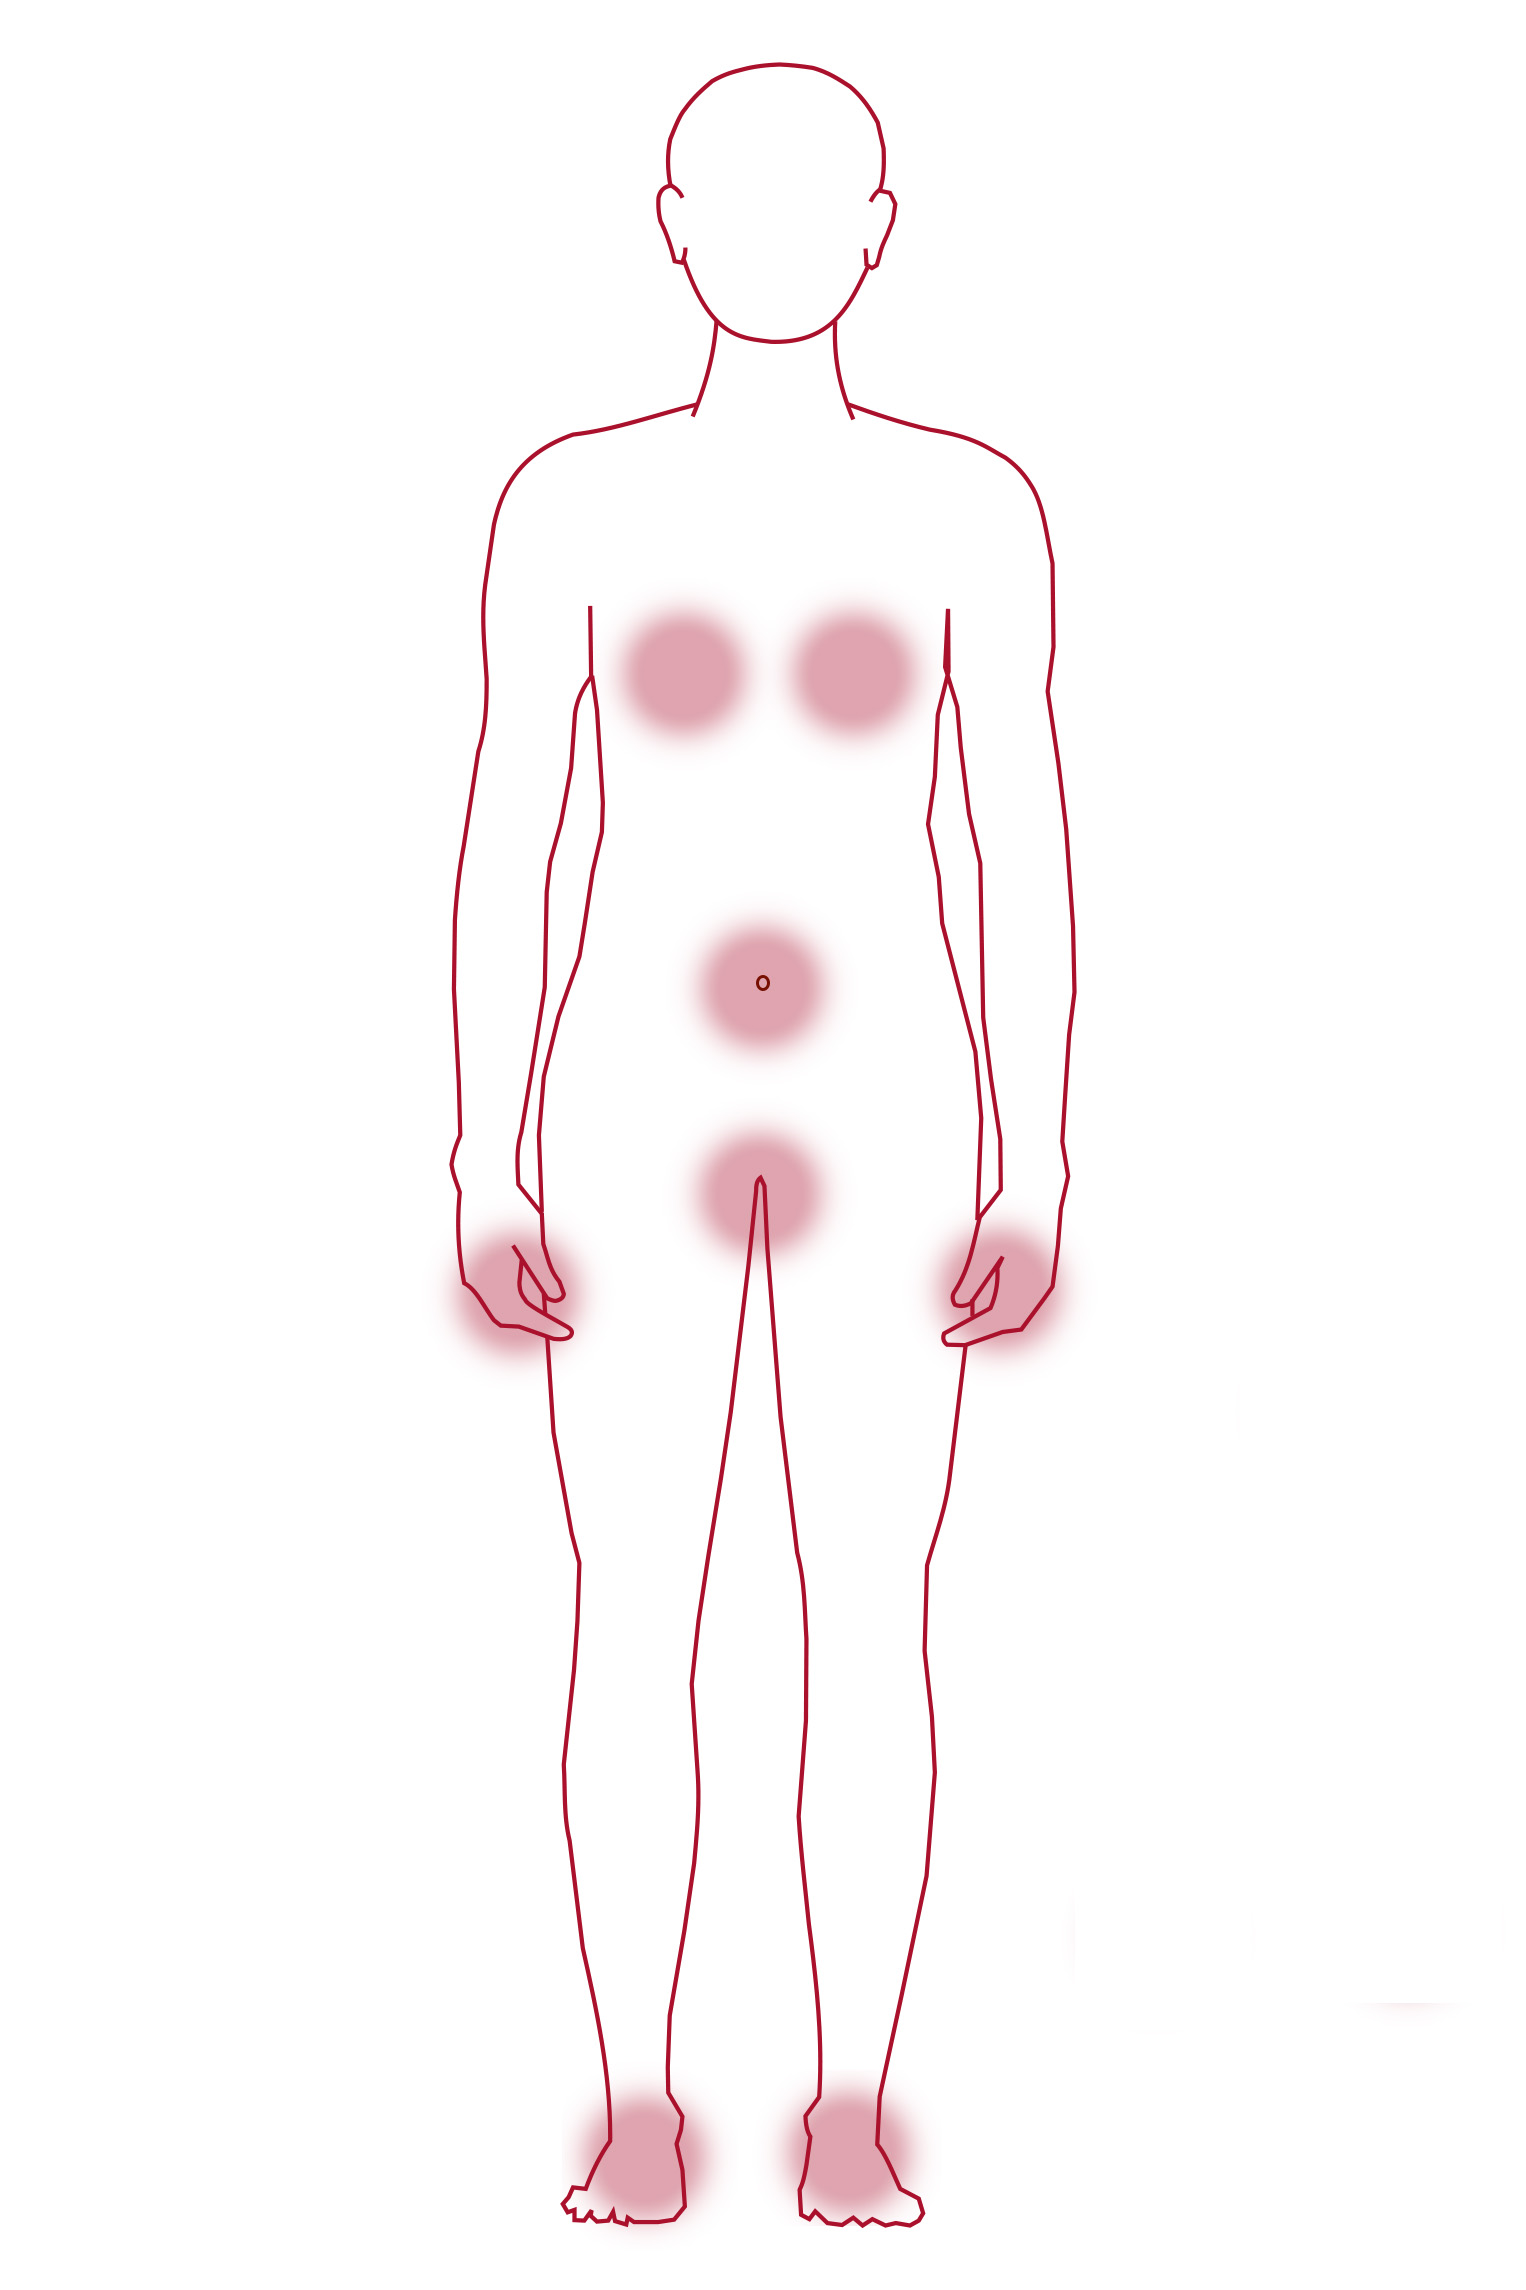 Illustration that shows where on the body the itching usualy occurs.